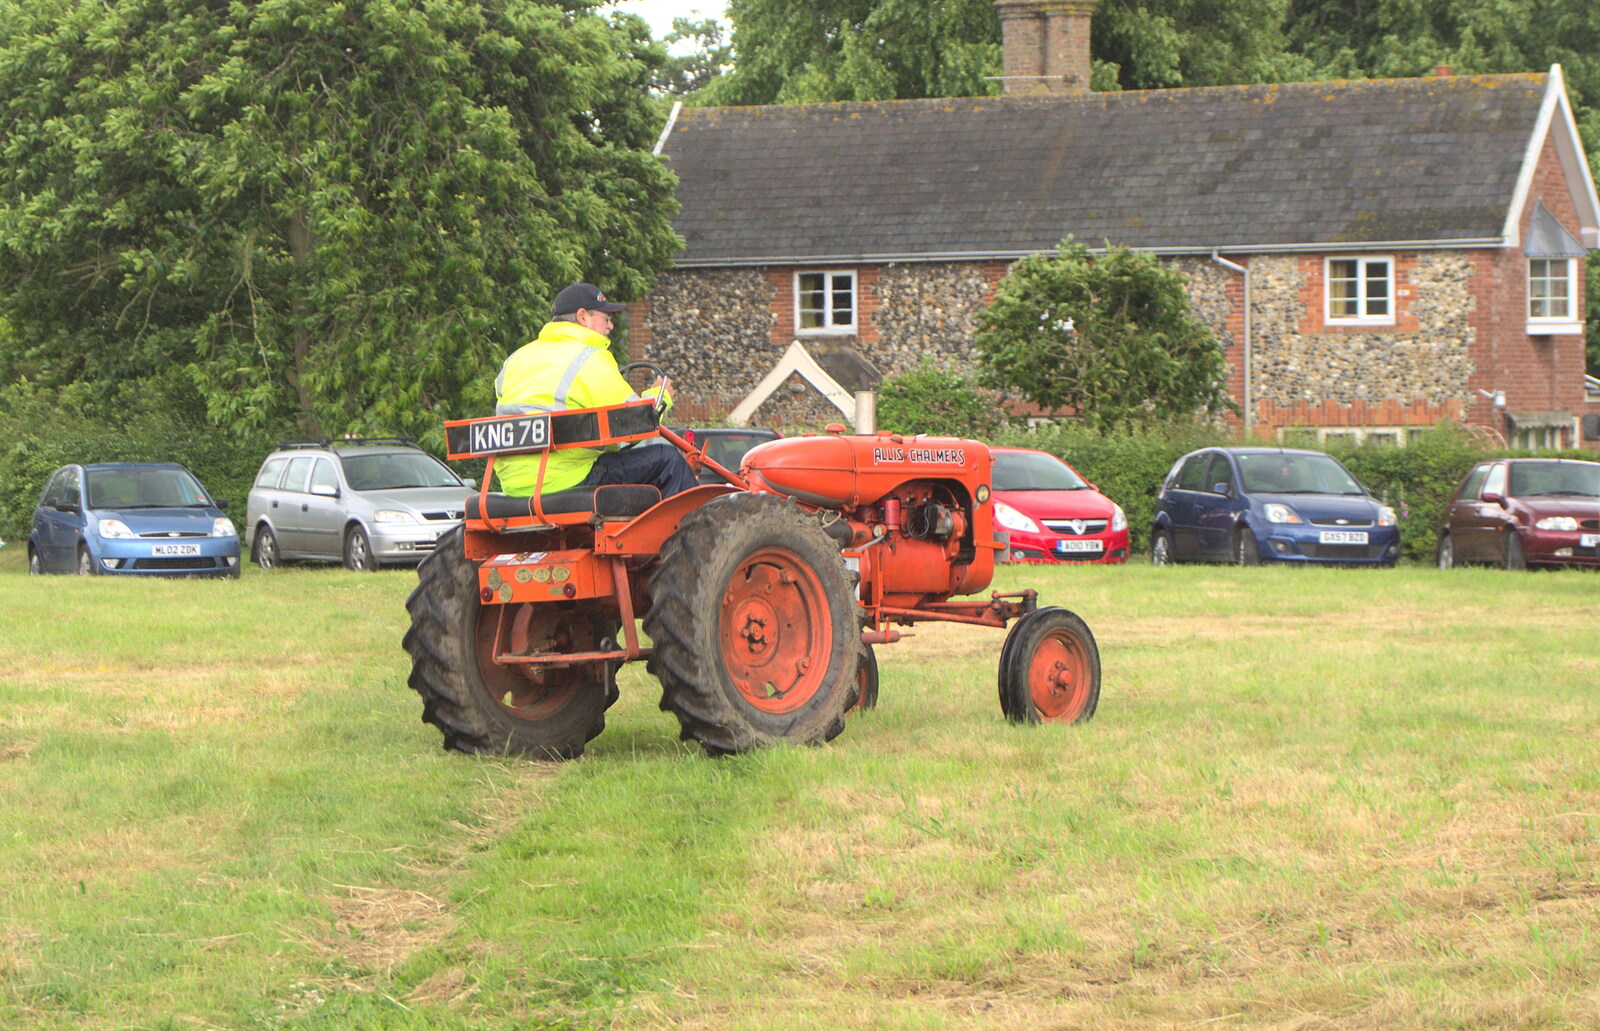 The first vintage tractor arrives from Thrandeston Pig Roast and Tractors, Thrandeston Little Green, Suffolk - 23rd June 2013